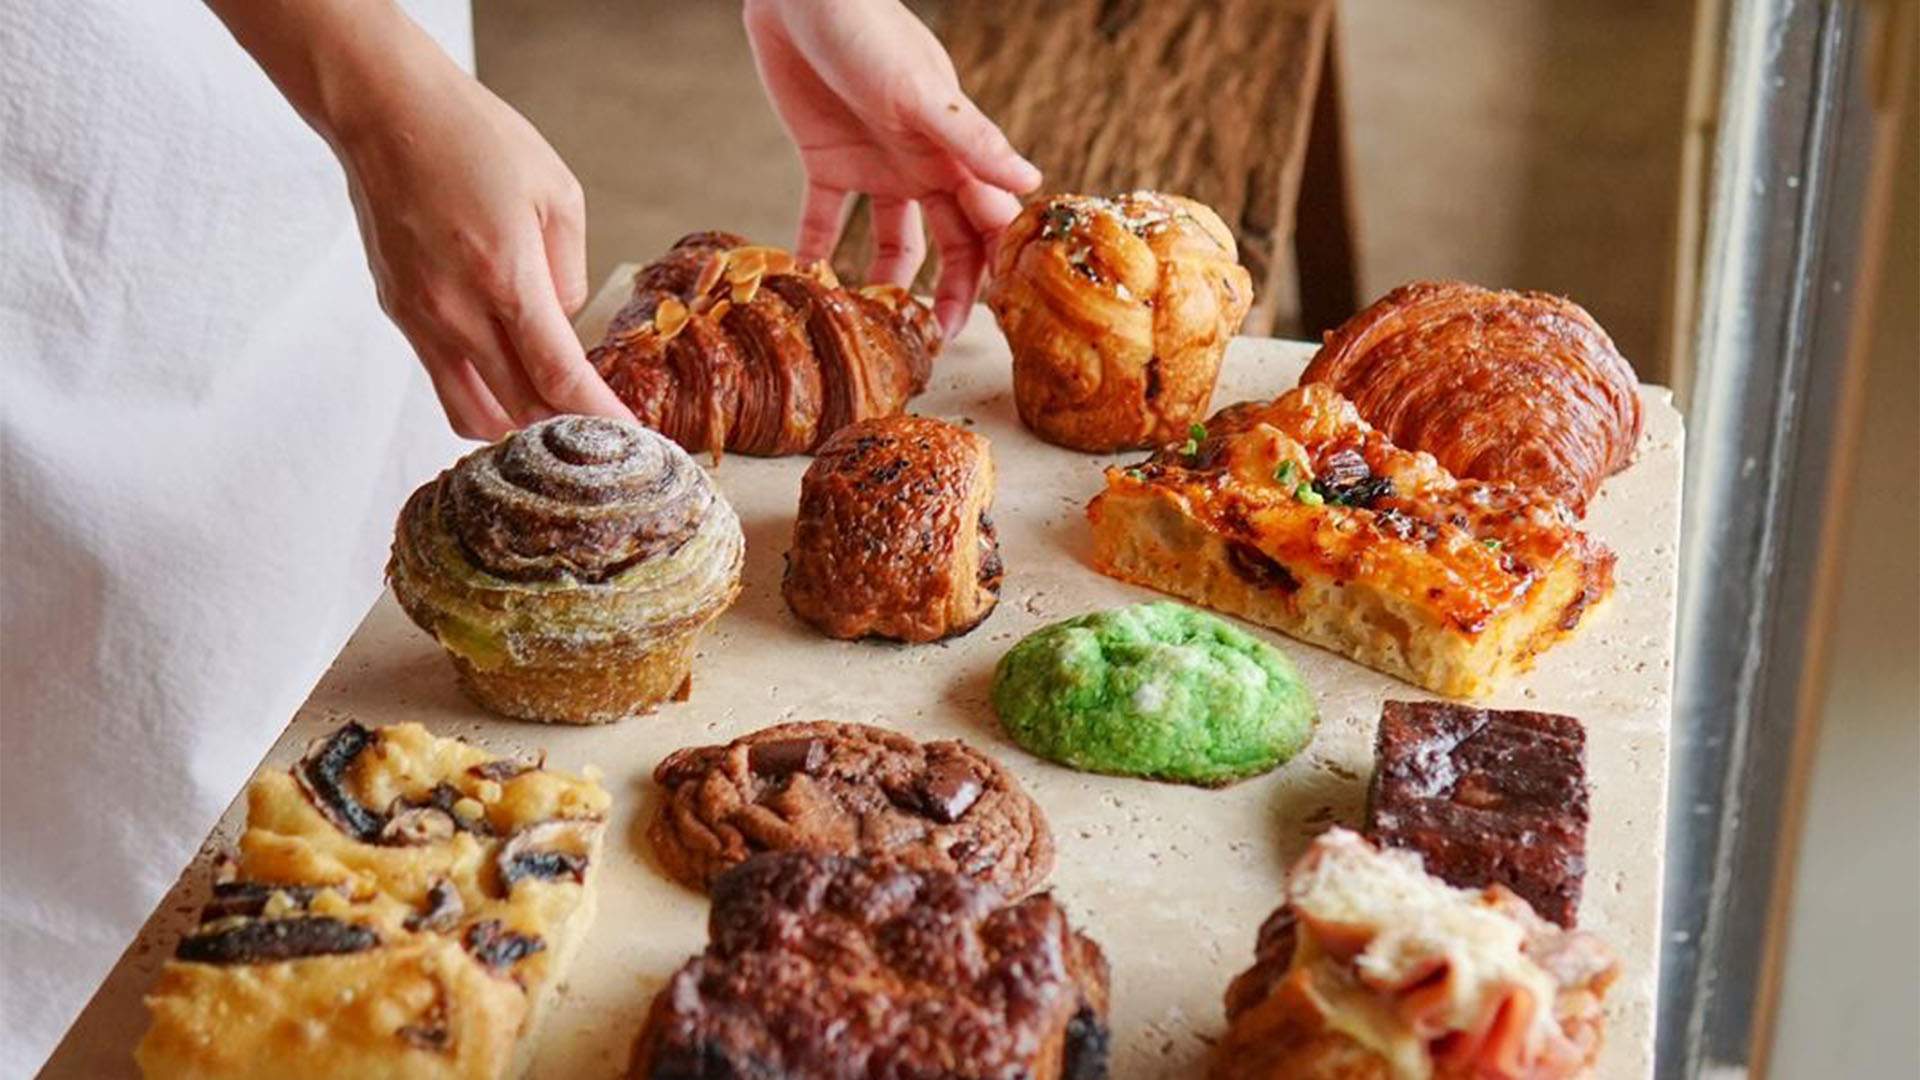 Pantry Story Is the New Parramatta Road Bakery That's Already Garnering Lines Around the Block